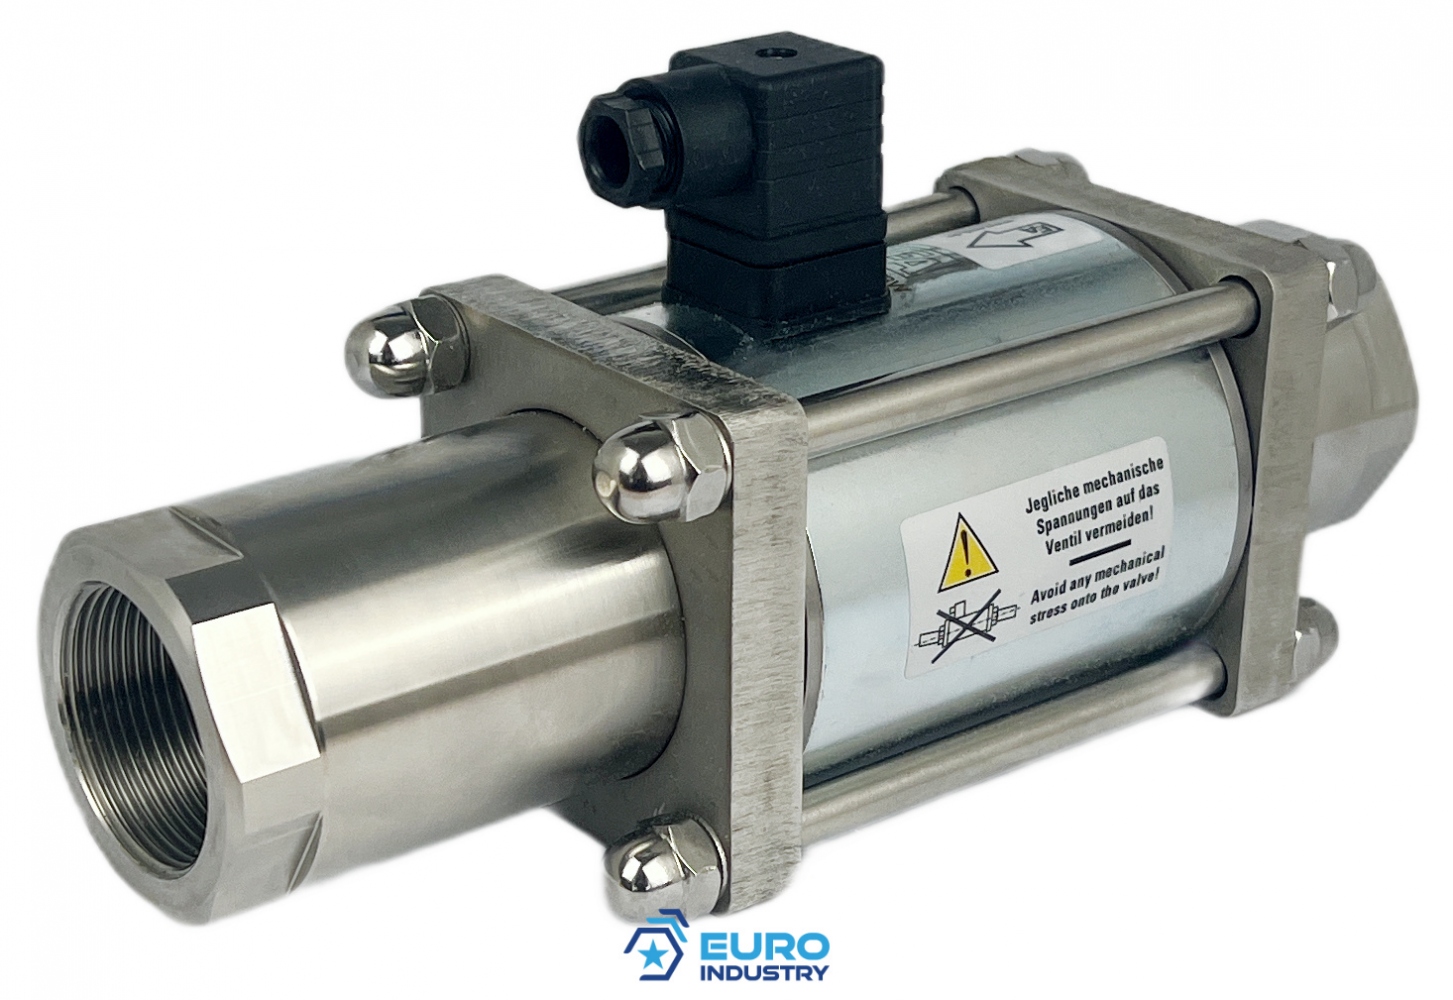 pics/end-armaturen/end-armaturen-electro-controlled-stainless-steel-coaxial-valve-l.jpg